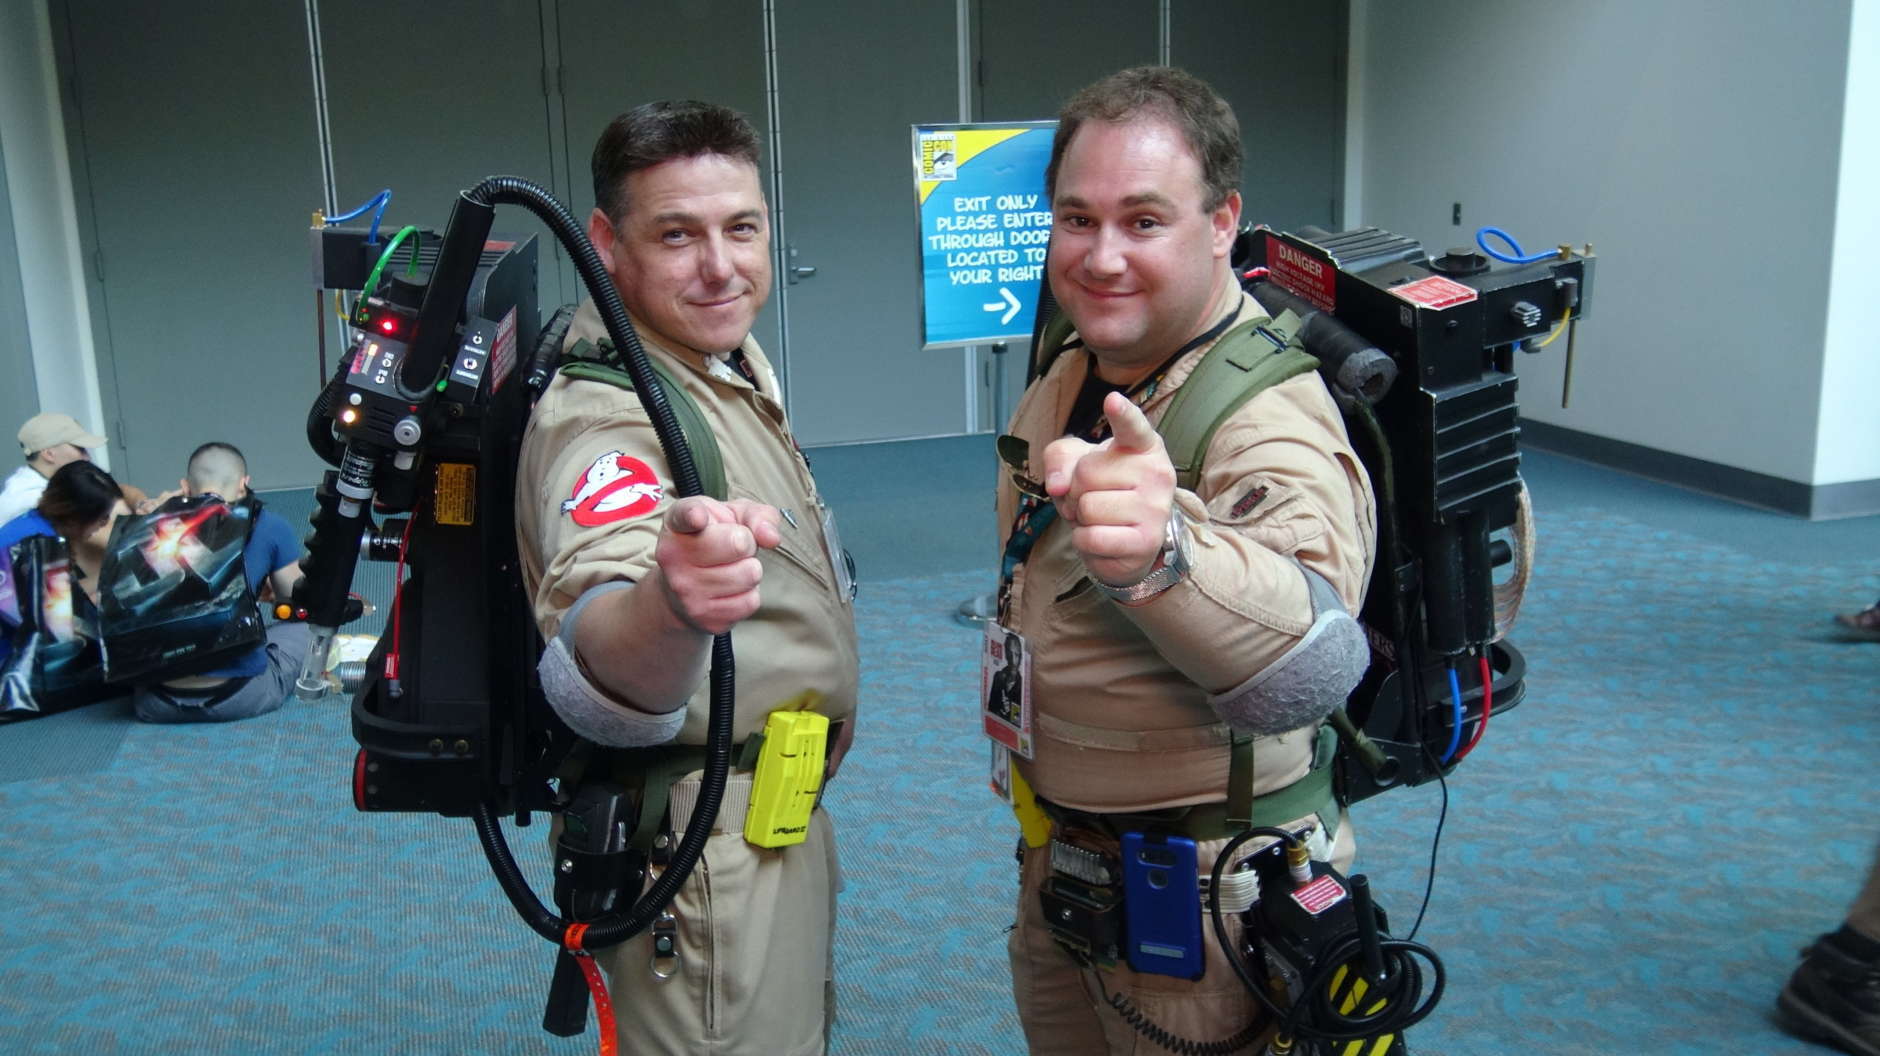 Comic-Con attendees dress as characters from "The Ghostbusters." (Courtesy Kenny Fried)